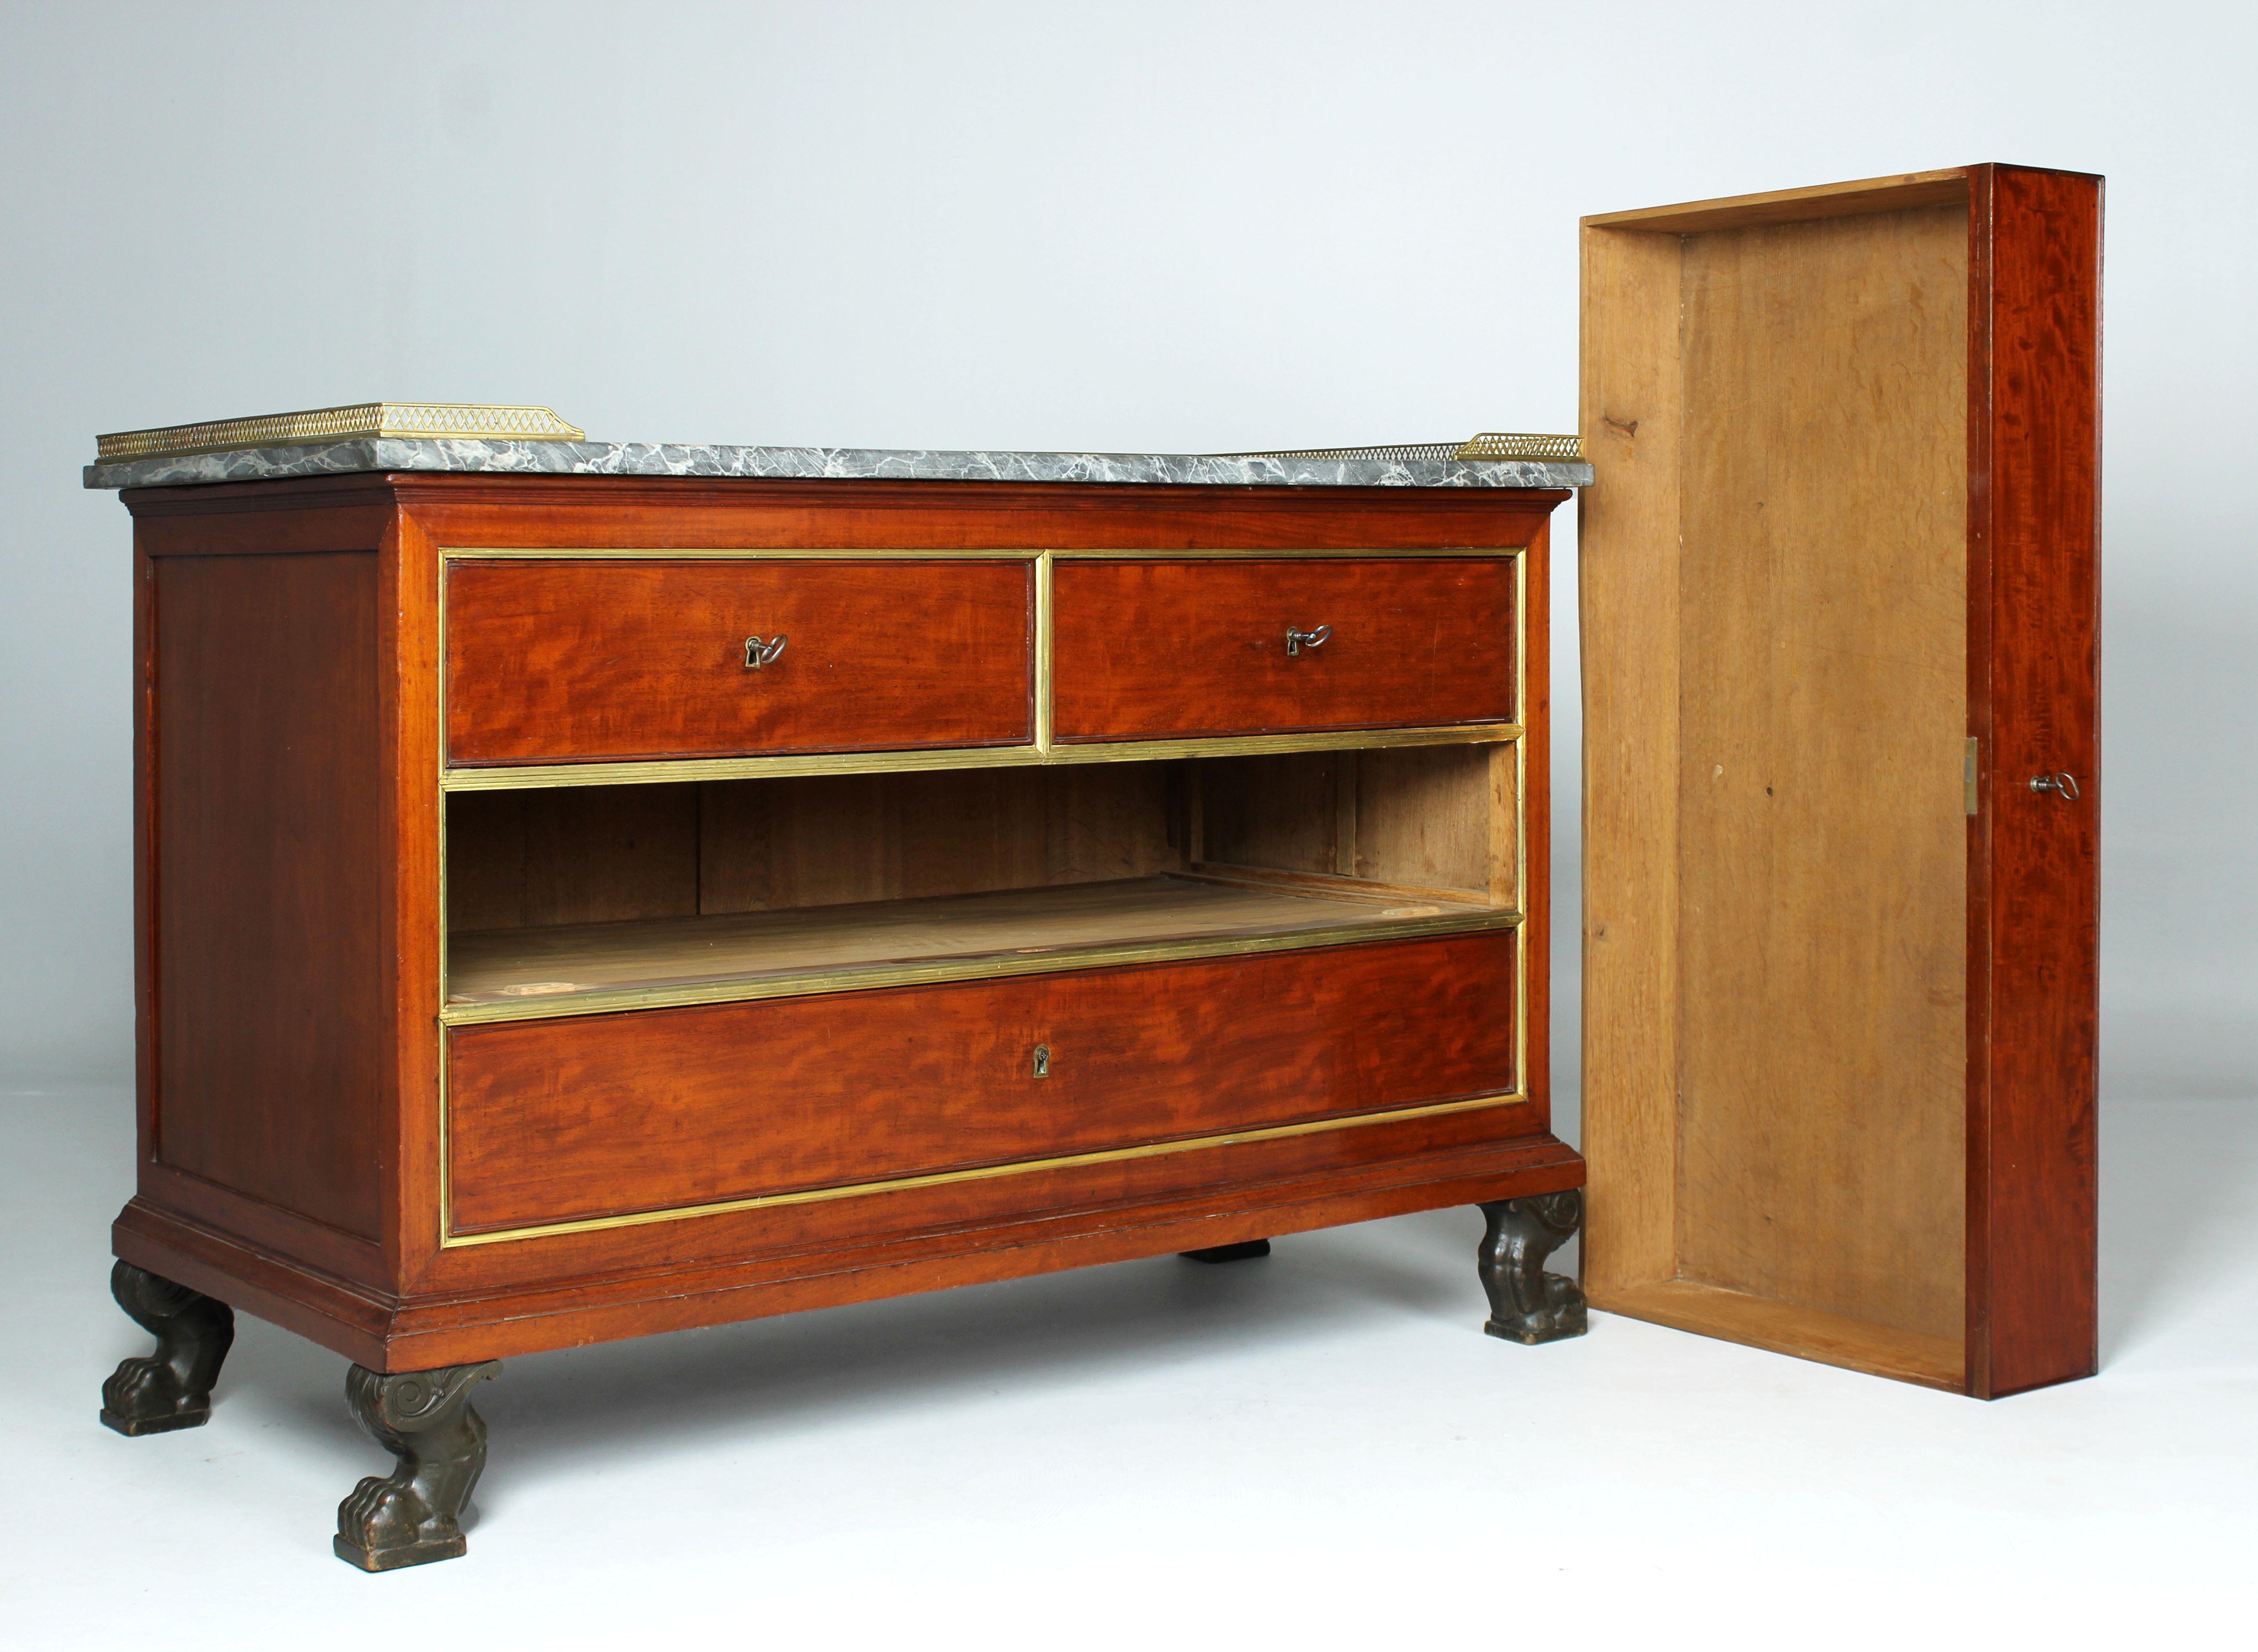 Mahogany Empire Chest Of Drawers, Stamped Jacob Frères Rue Meslée, Paris c. 1800 For Sale 4